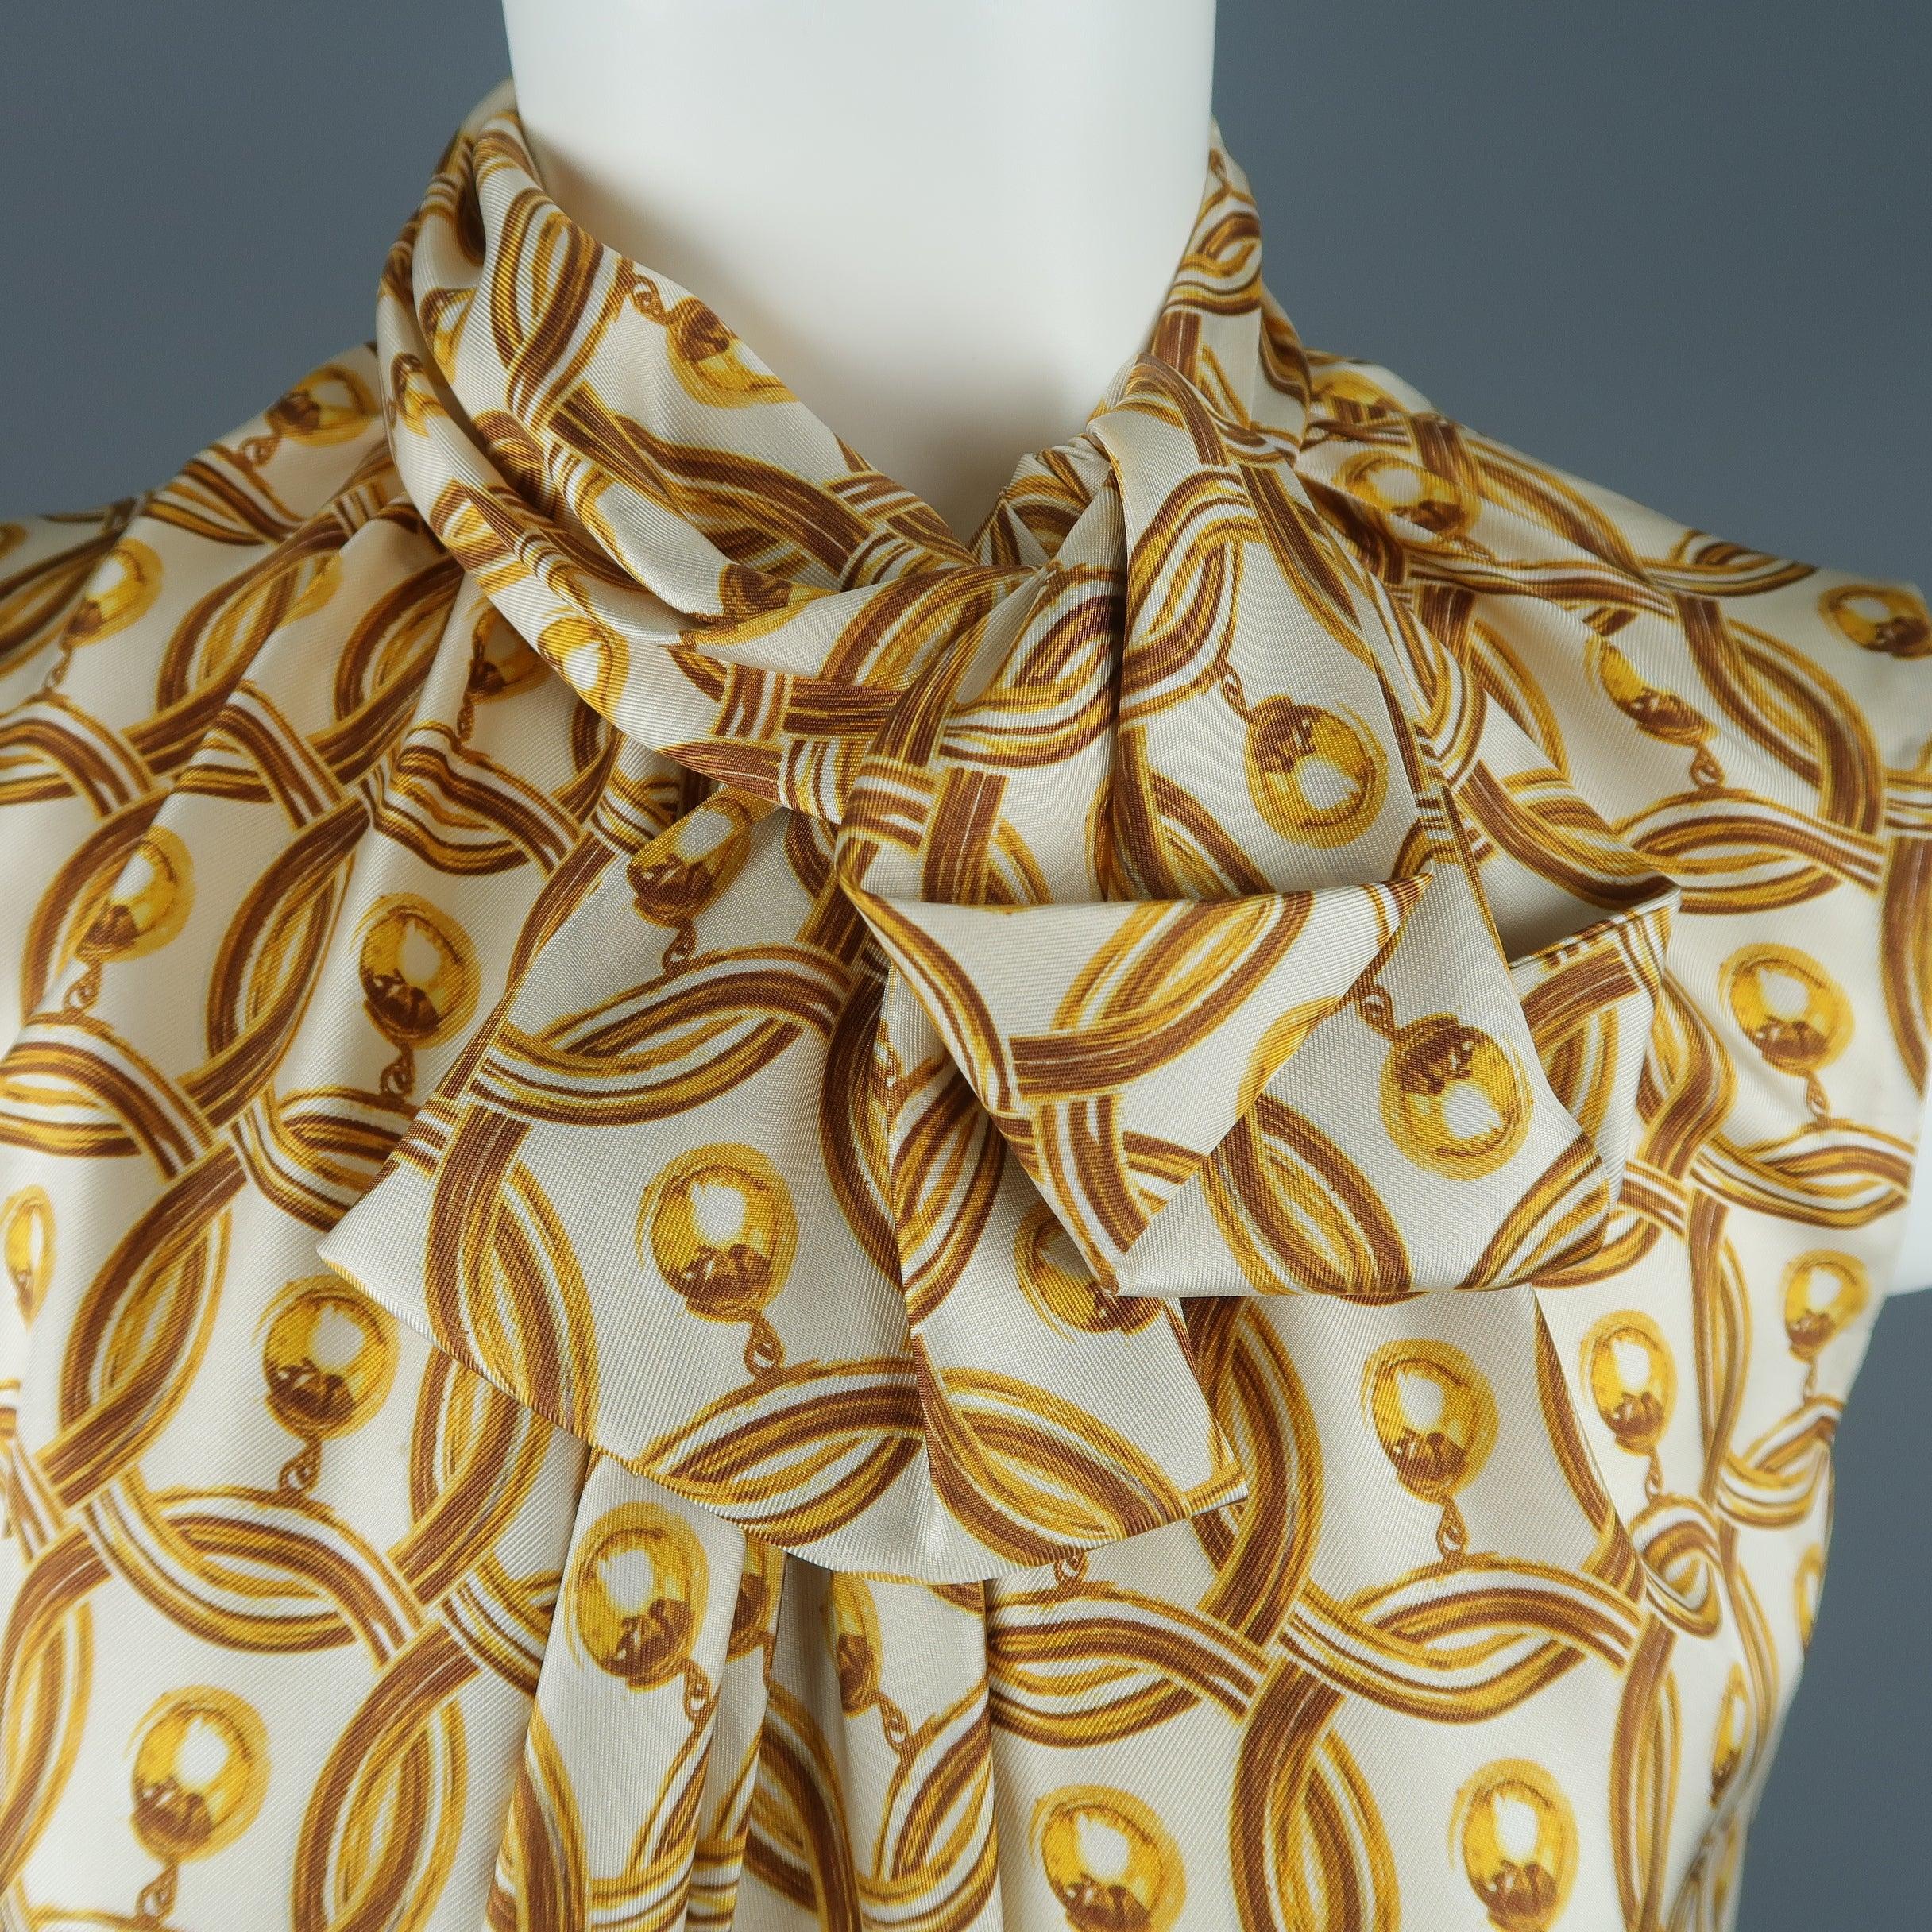 MOSCHINO sleeveless blouse comes in cream silk twill with all over interlocking gold hoop stud earring print and features an A line silhouette and high gathered collar with tie and buttoned back. Made in Italy.
Excellent Pre-Owned Condition.
